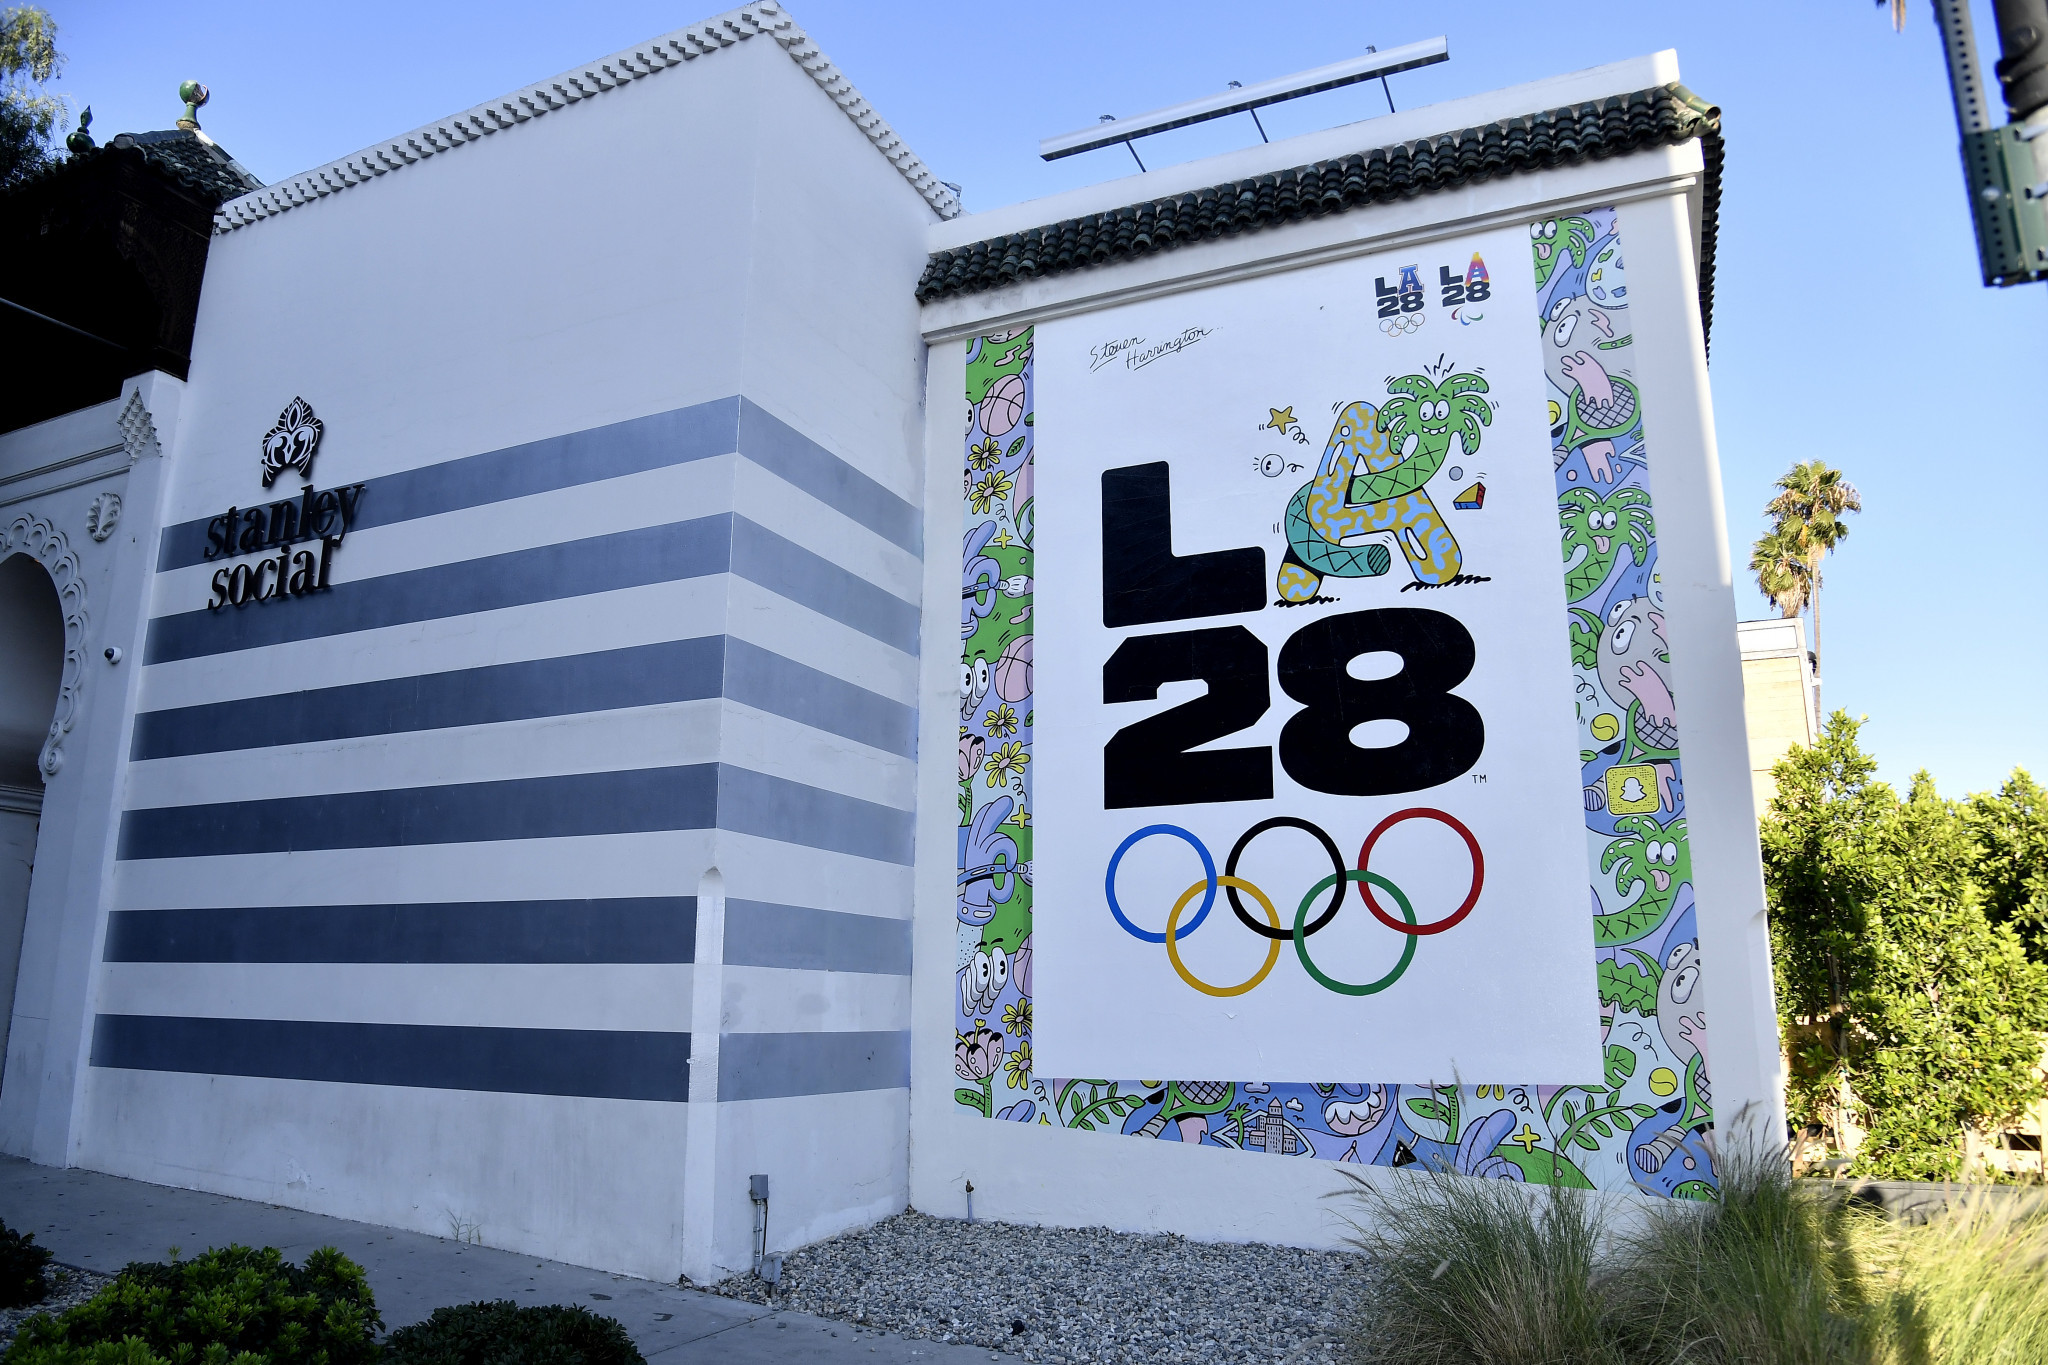 Los Angeles previously hosted the Olympics in 1984 and 1932, but never before the Paralympics ©Getty Images